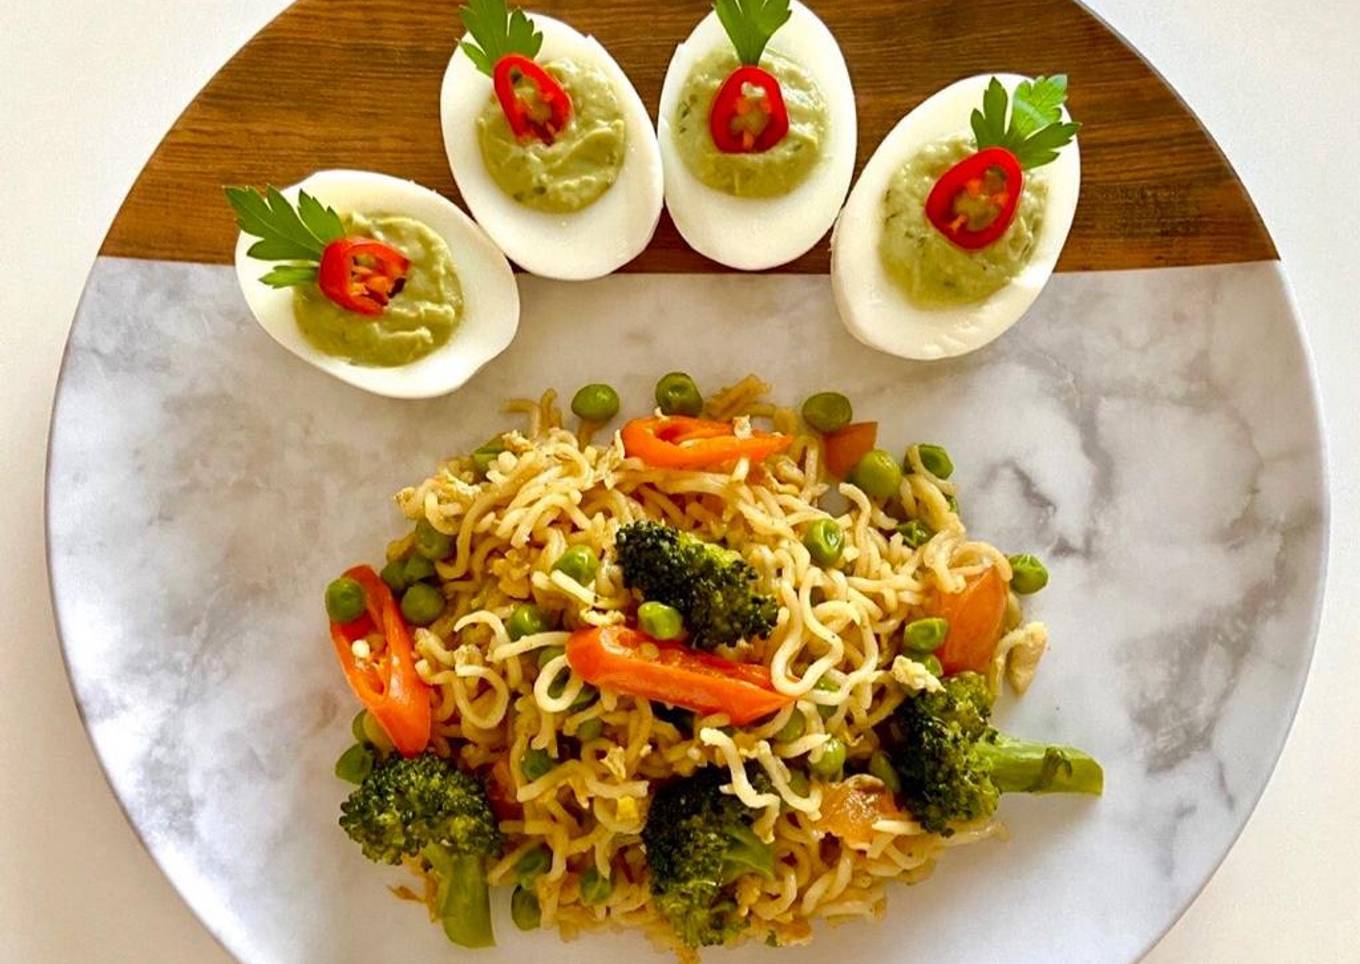 Maggie Noodles with egg and vegetables.<br />Avocado Deviled Eggs